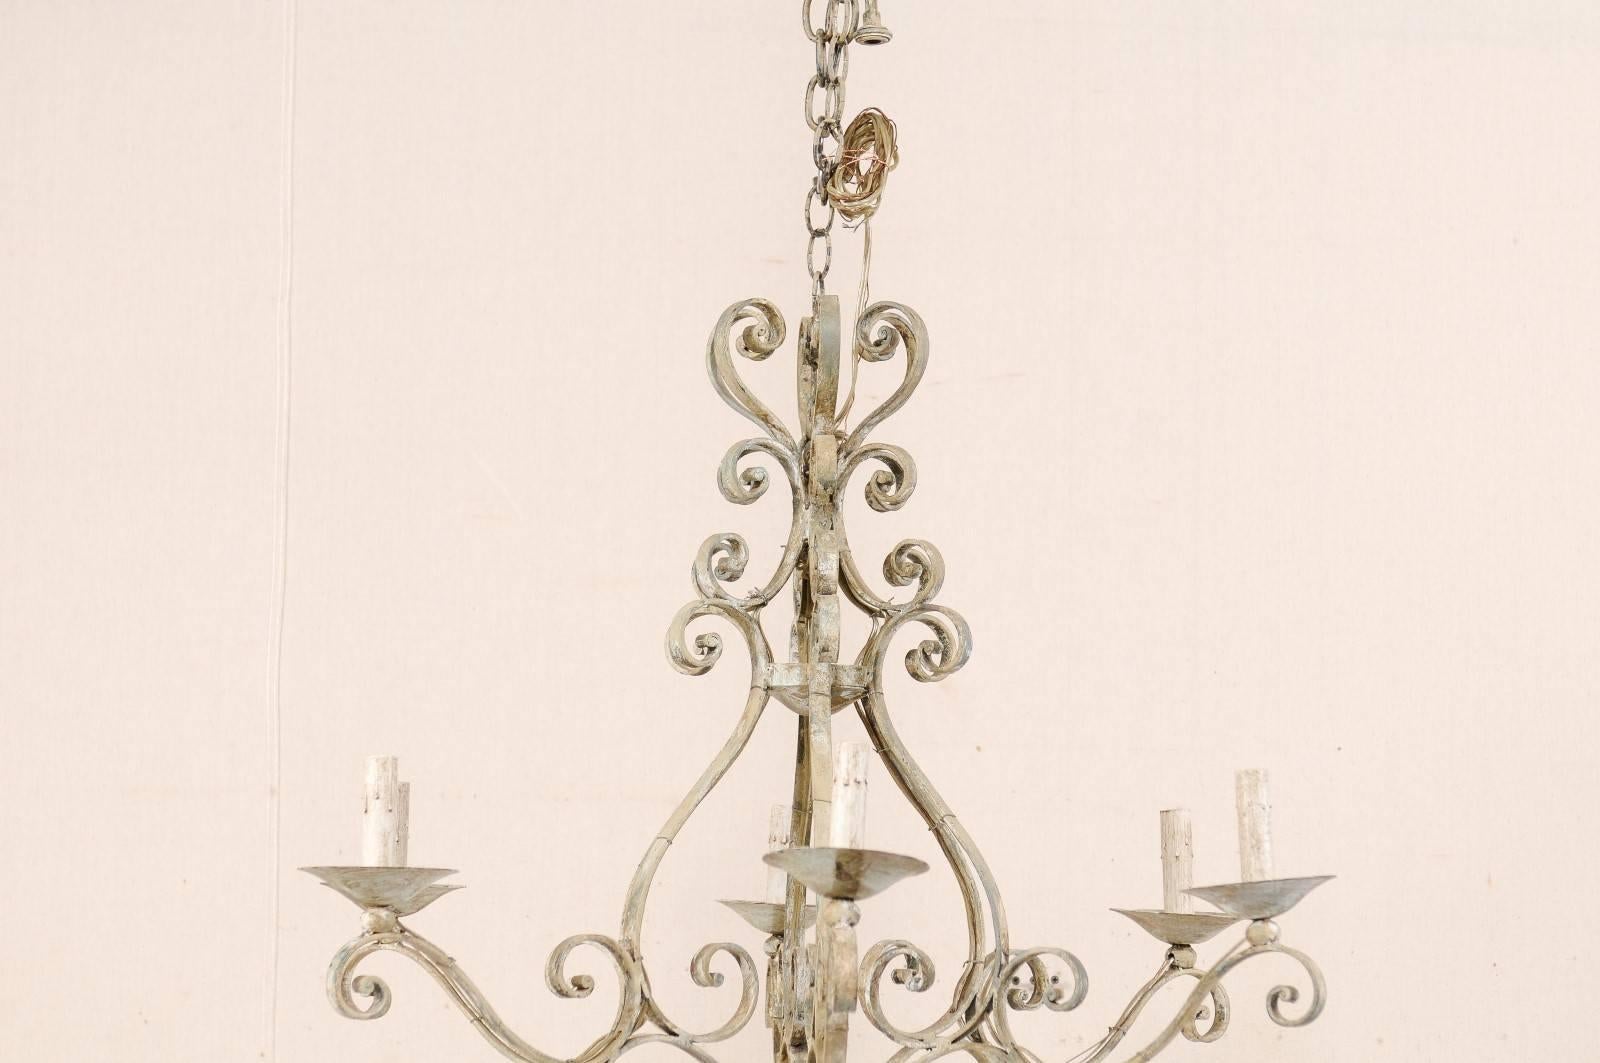 Metal French Mid-20th Century Iron Chandelier Painted with Neutral Beige & Tan Colors